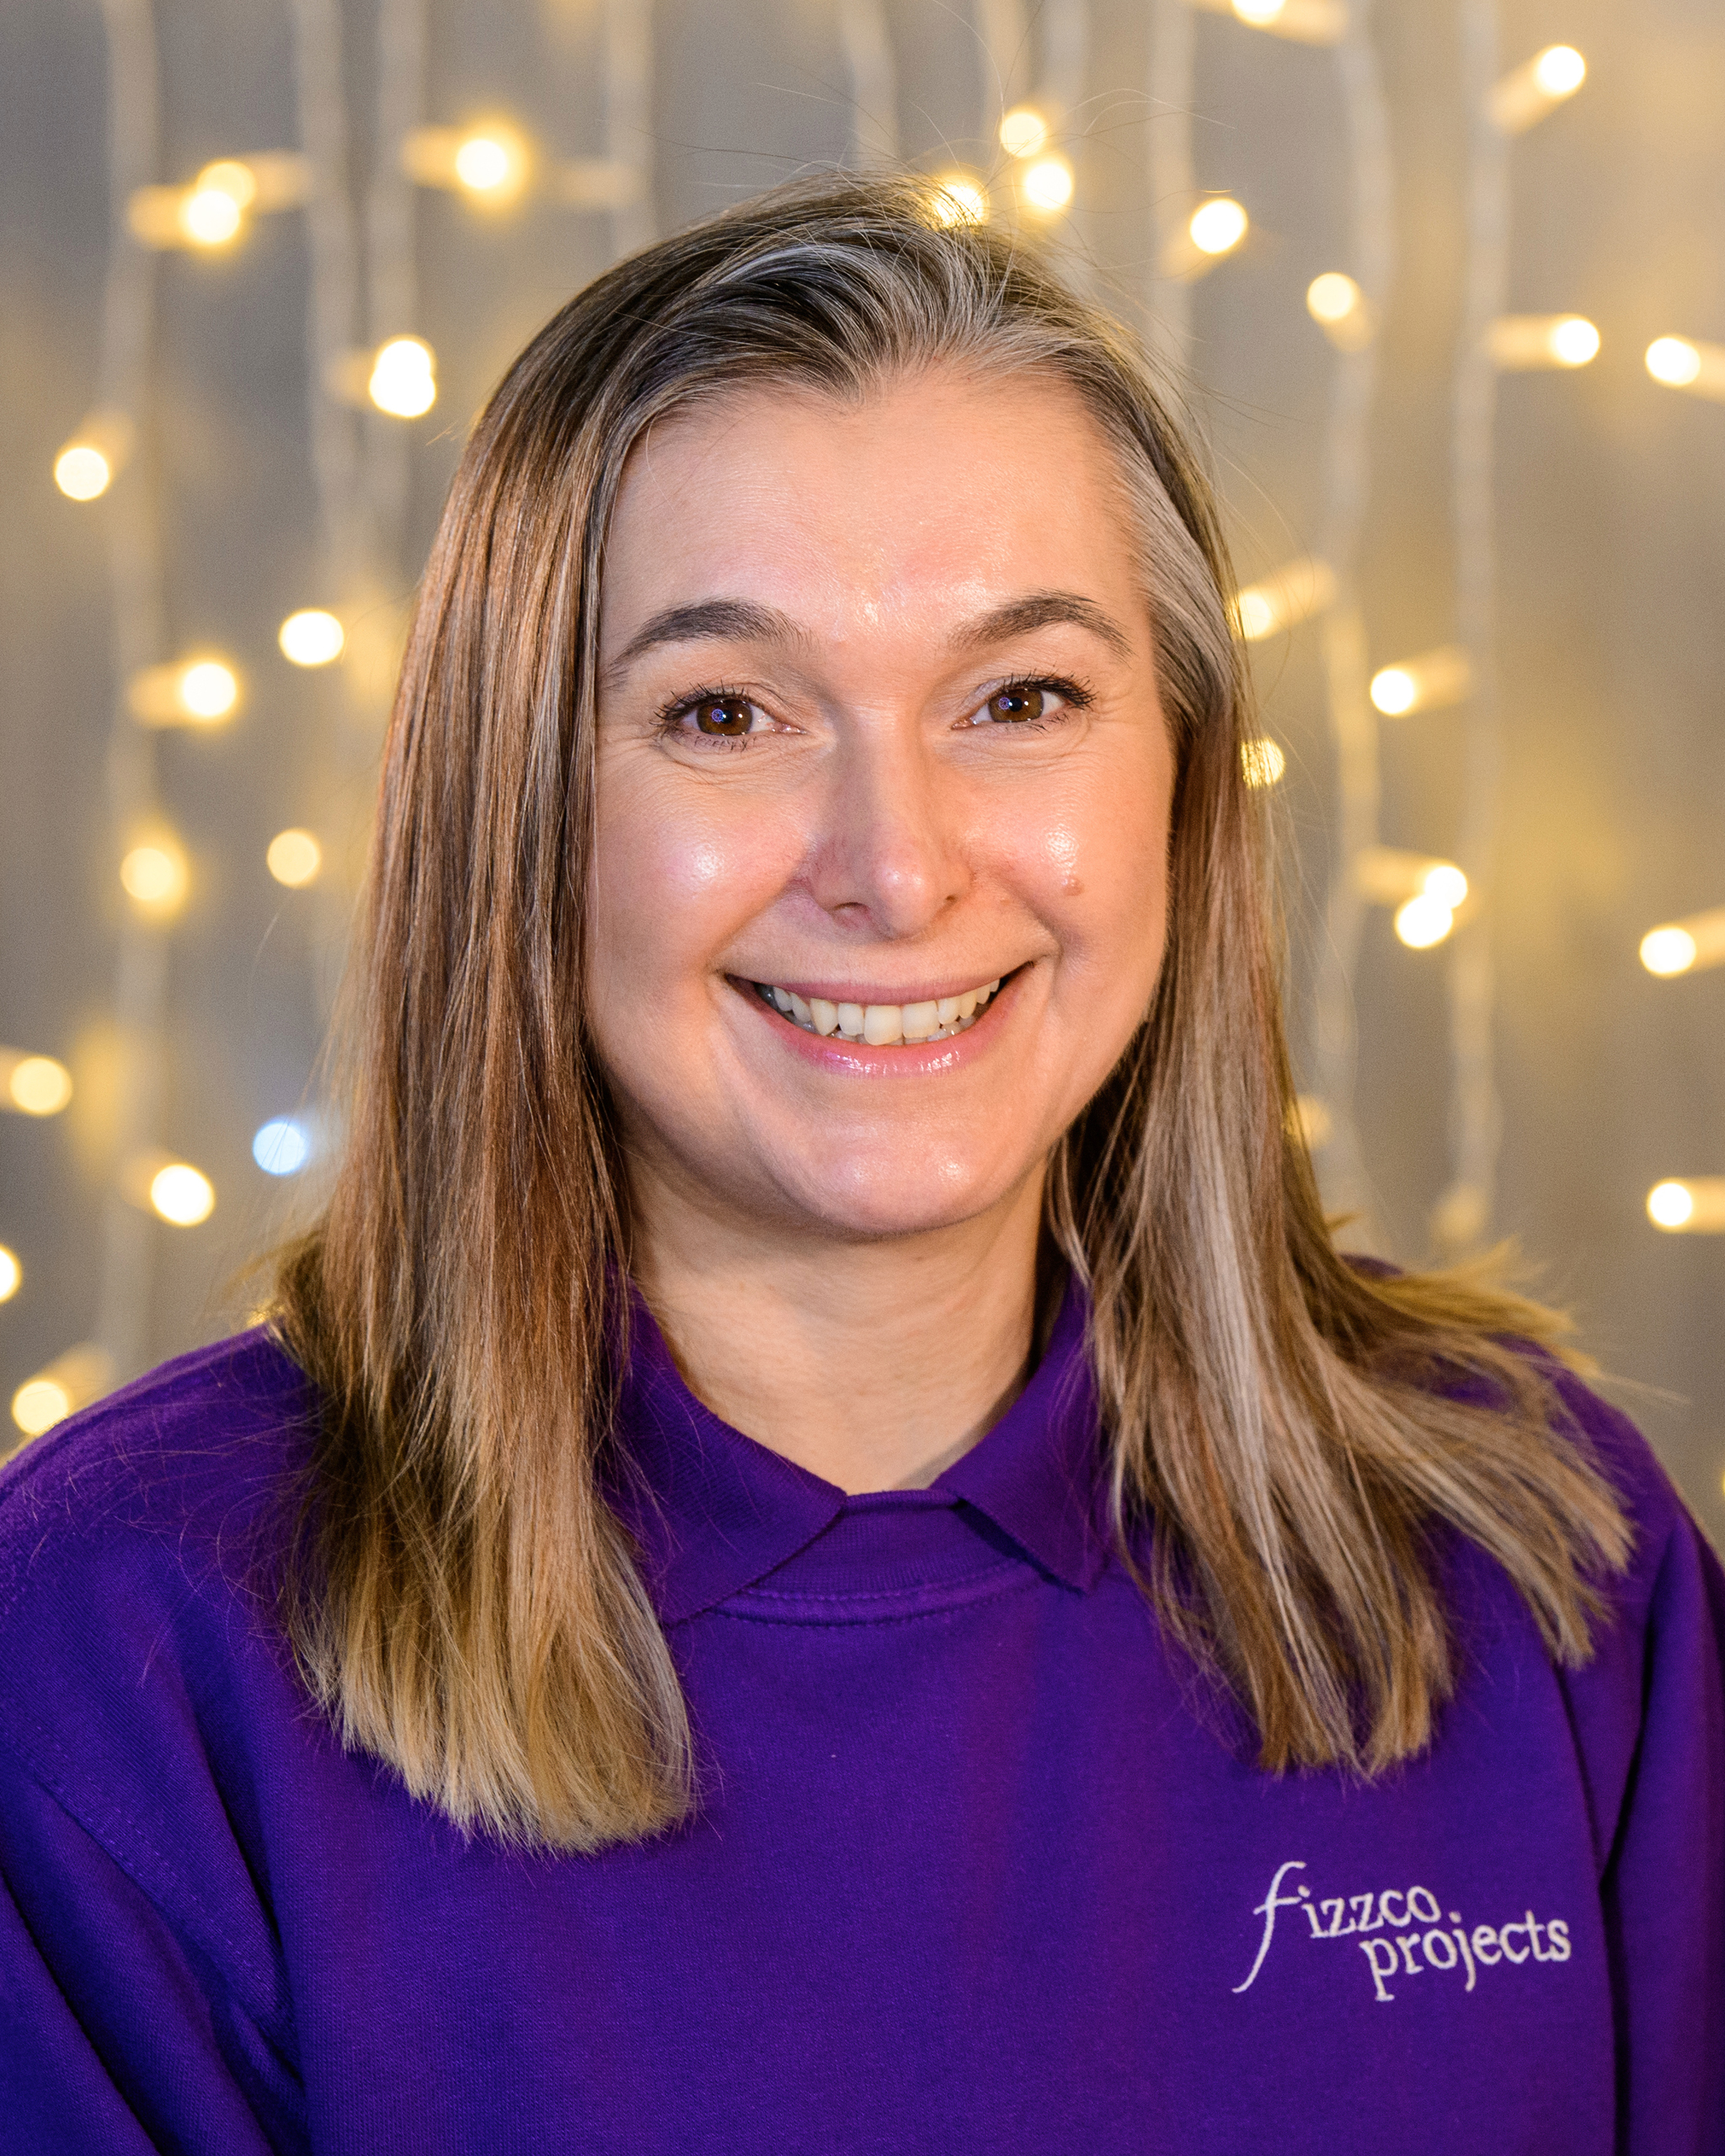 A headshot image of a Fizzco director wearing Fizzco’s purple uniform in front of warm white curtain lights.